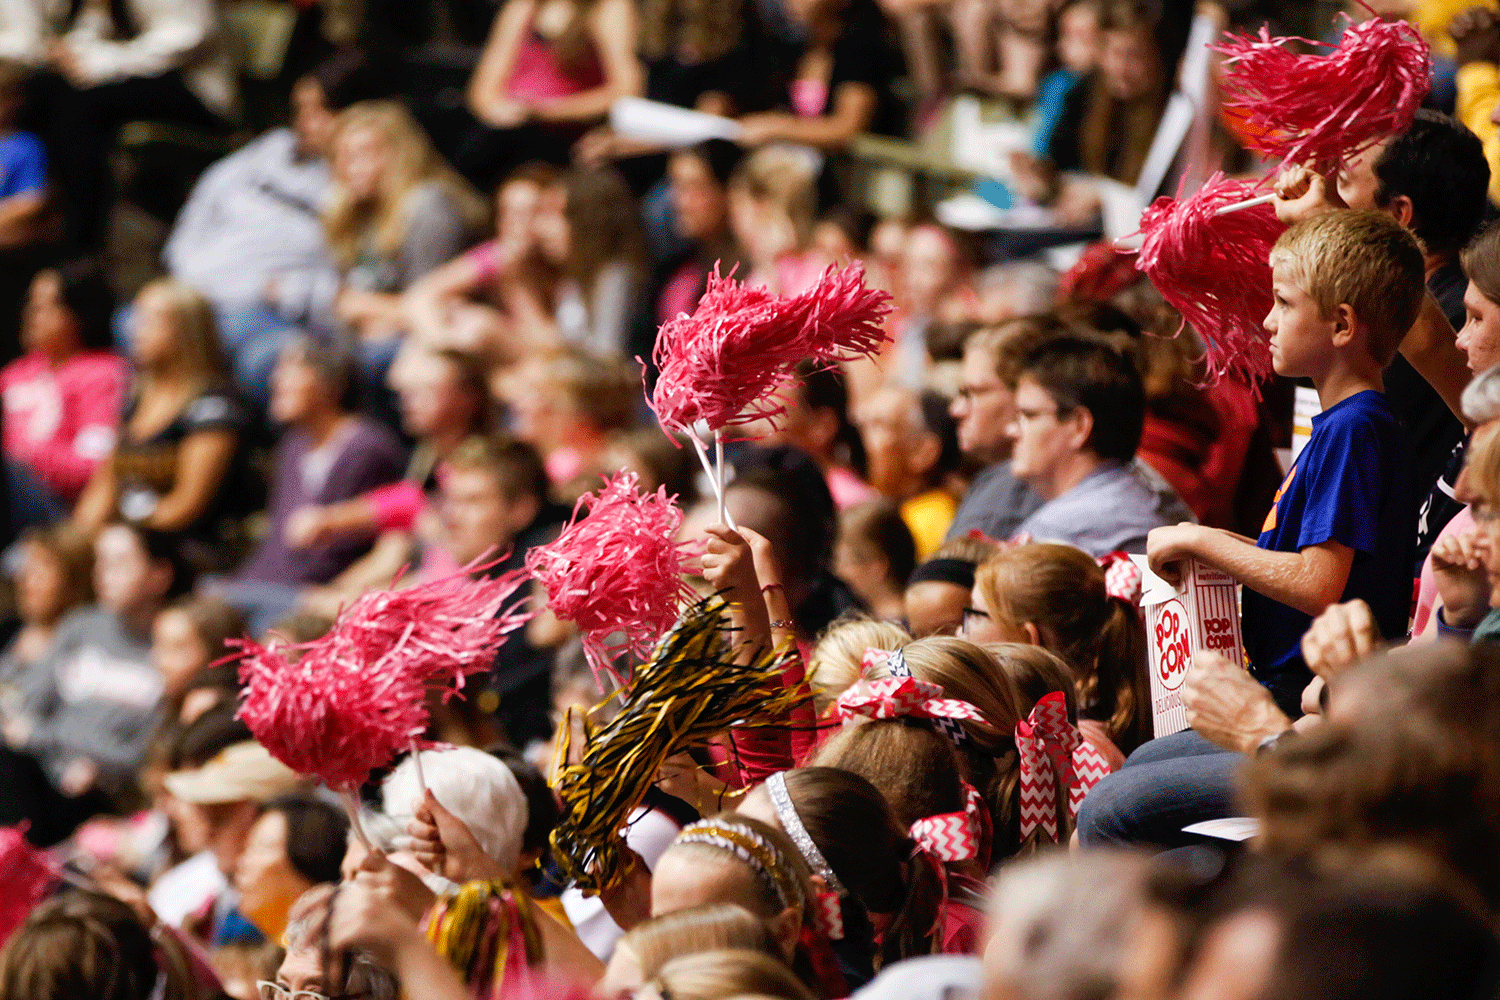 Tiger fans wave pink pom-poms in the air after scoring another point against Ole Miss. The theme of the night was "Pink Out" to support and raise awareness for breast cancer.